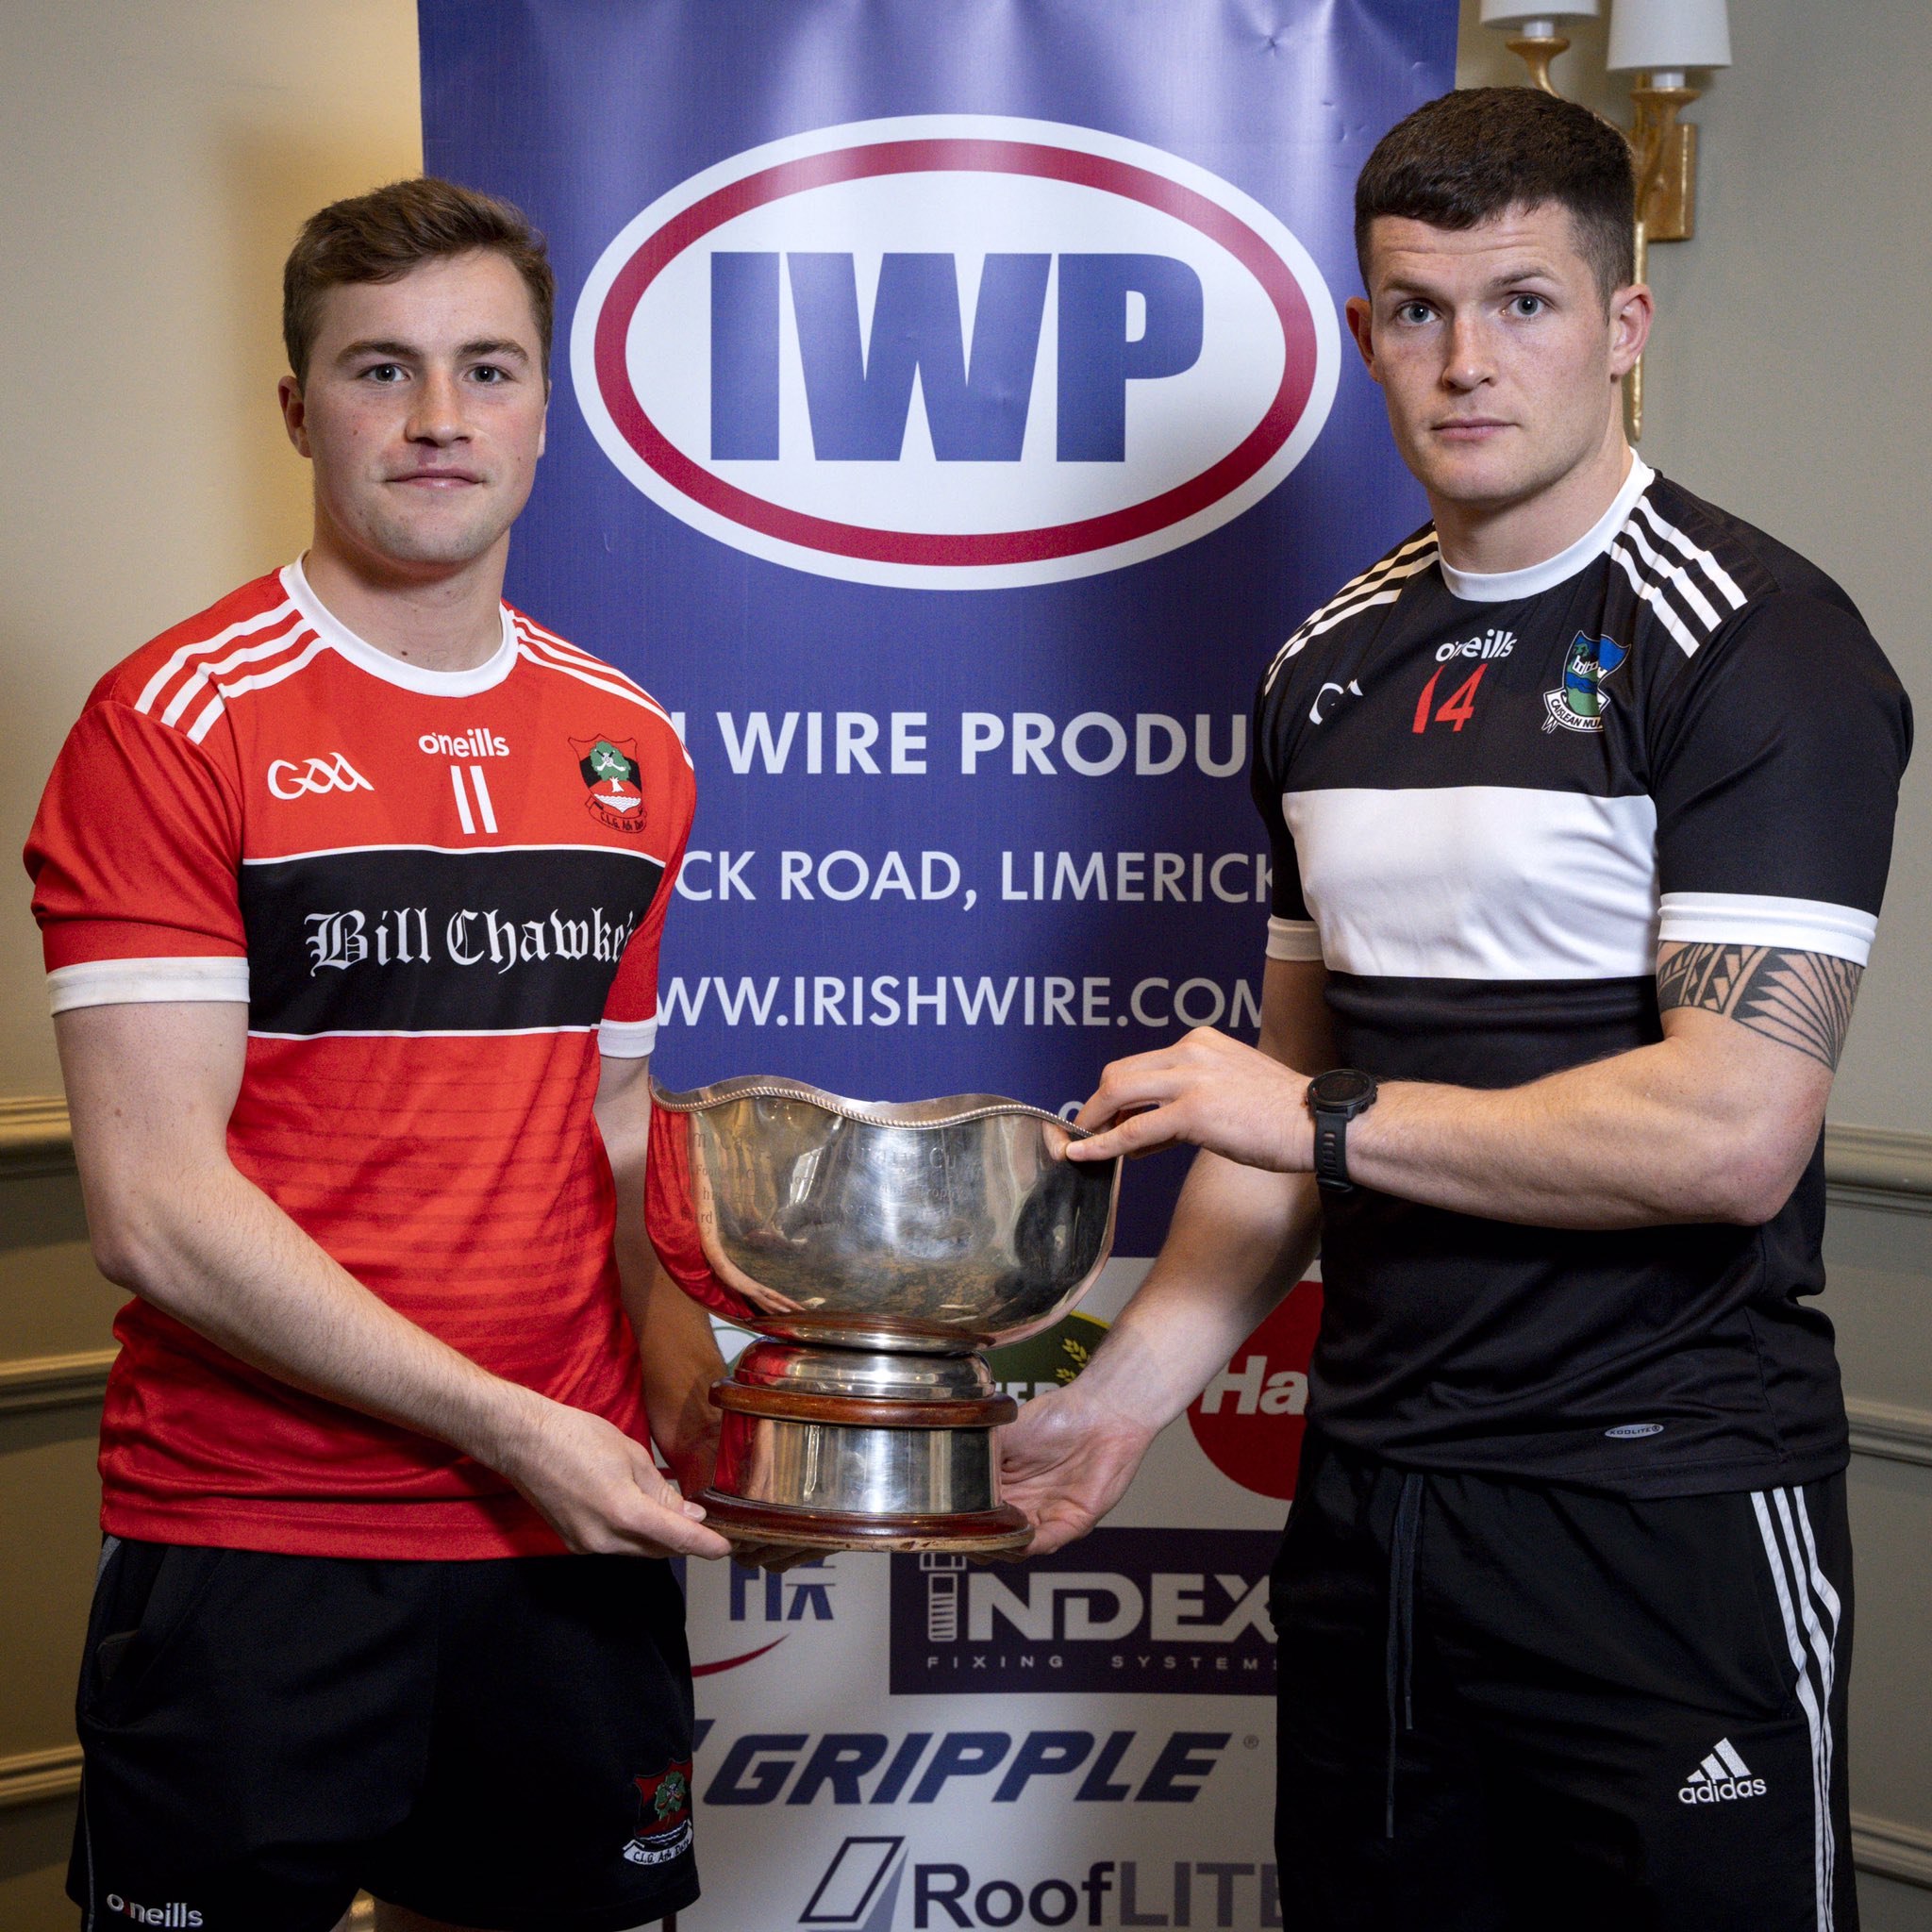 Griffins Coaches County Intermediate Football Championship Draw